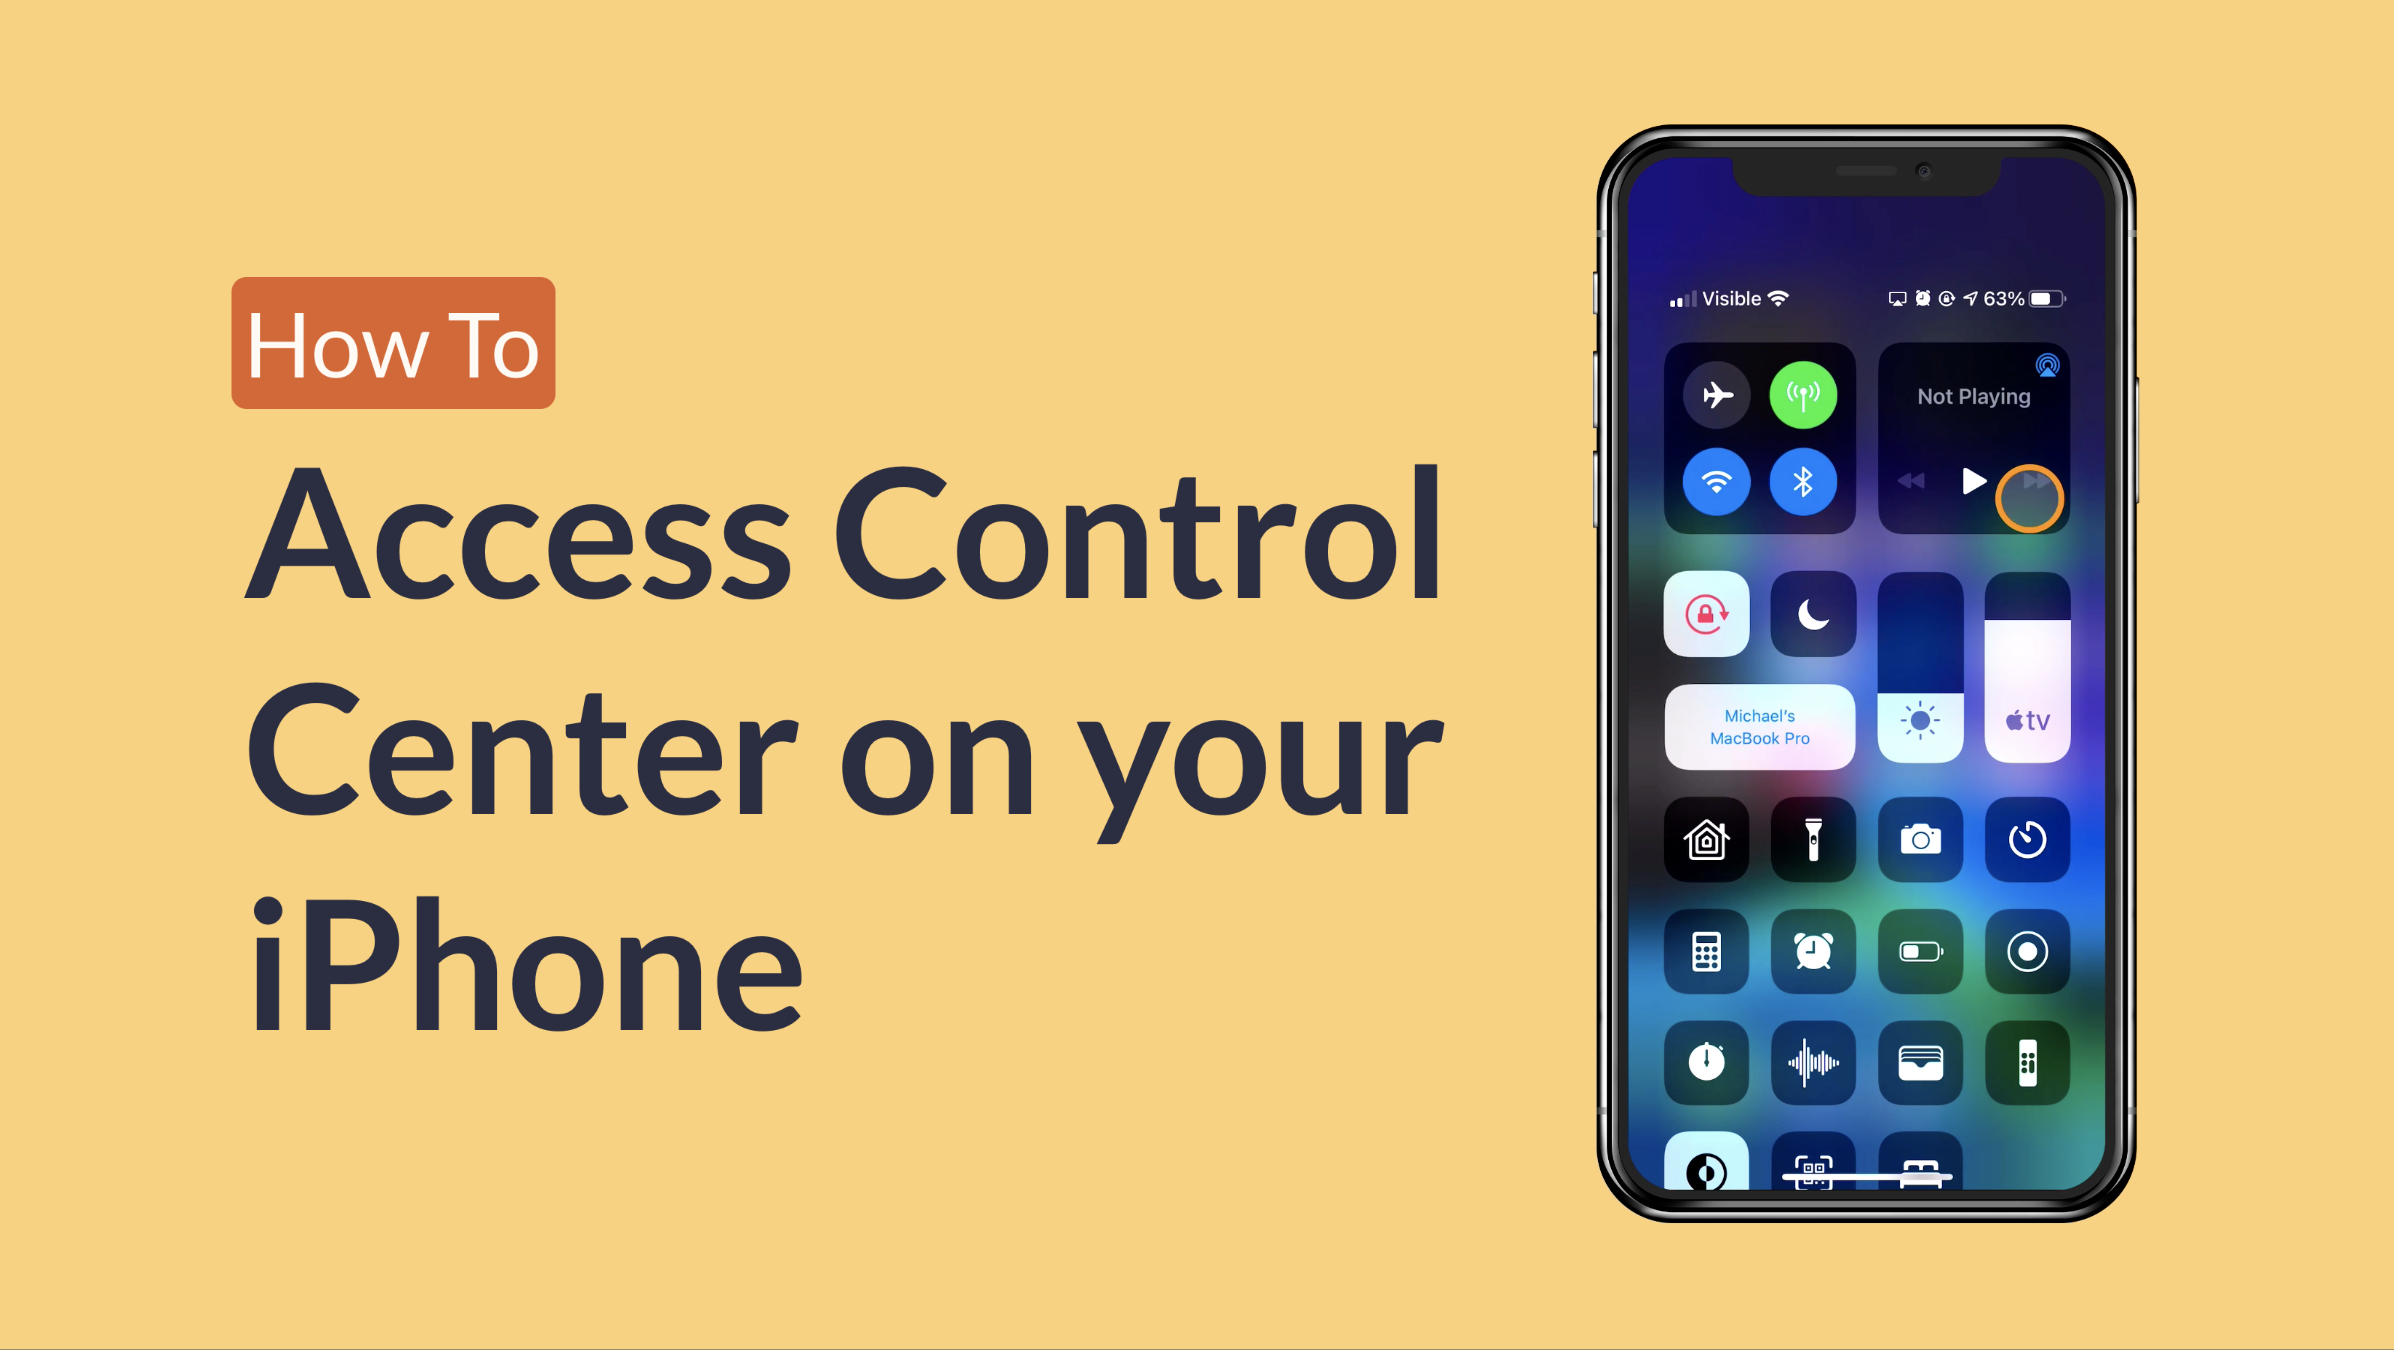 Discover how to access Control Center on your iPhone so that you can be more productive